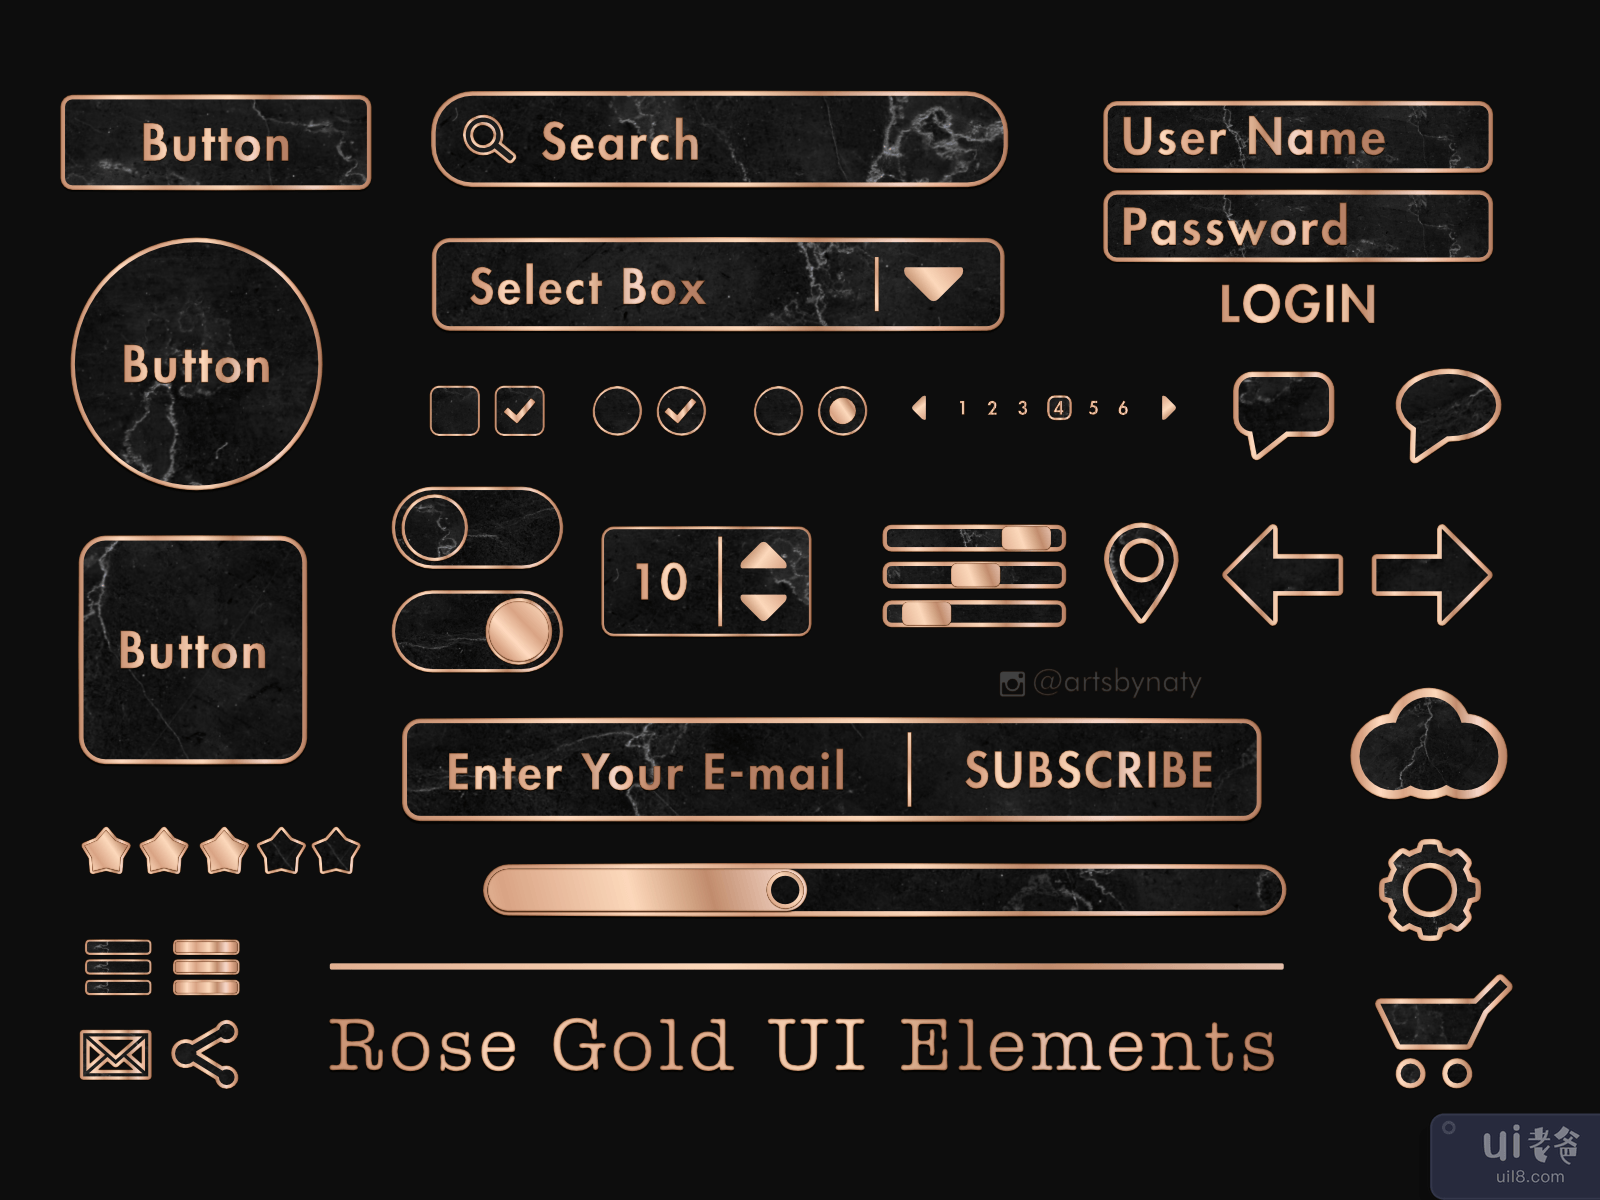 Rose Gold and Dark UI Elements